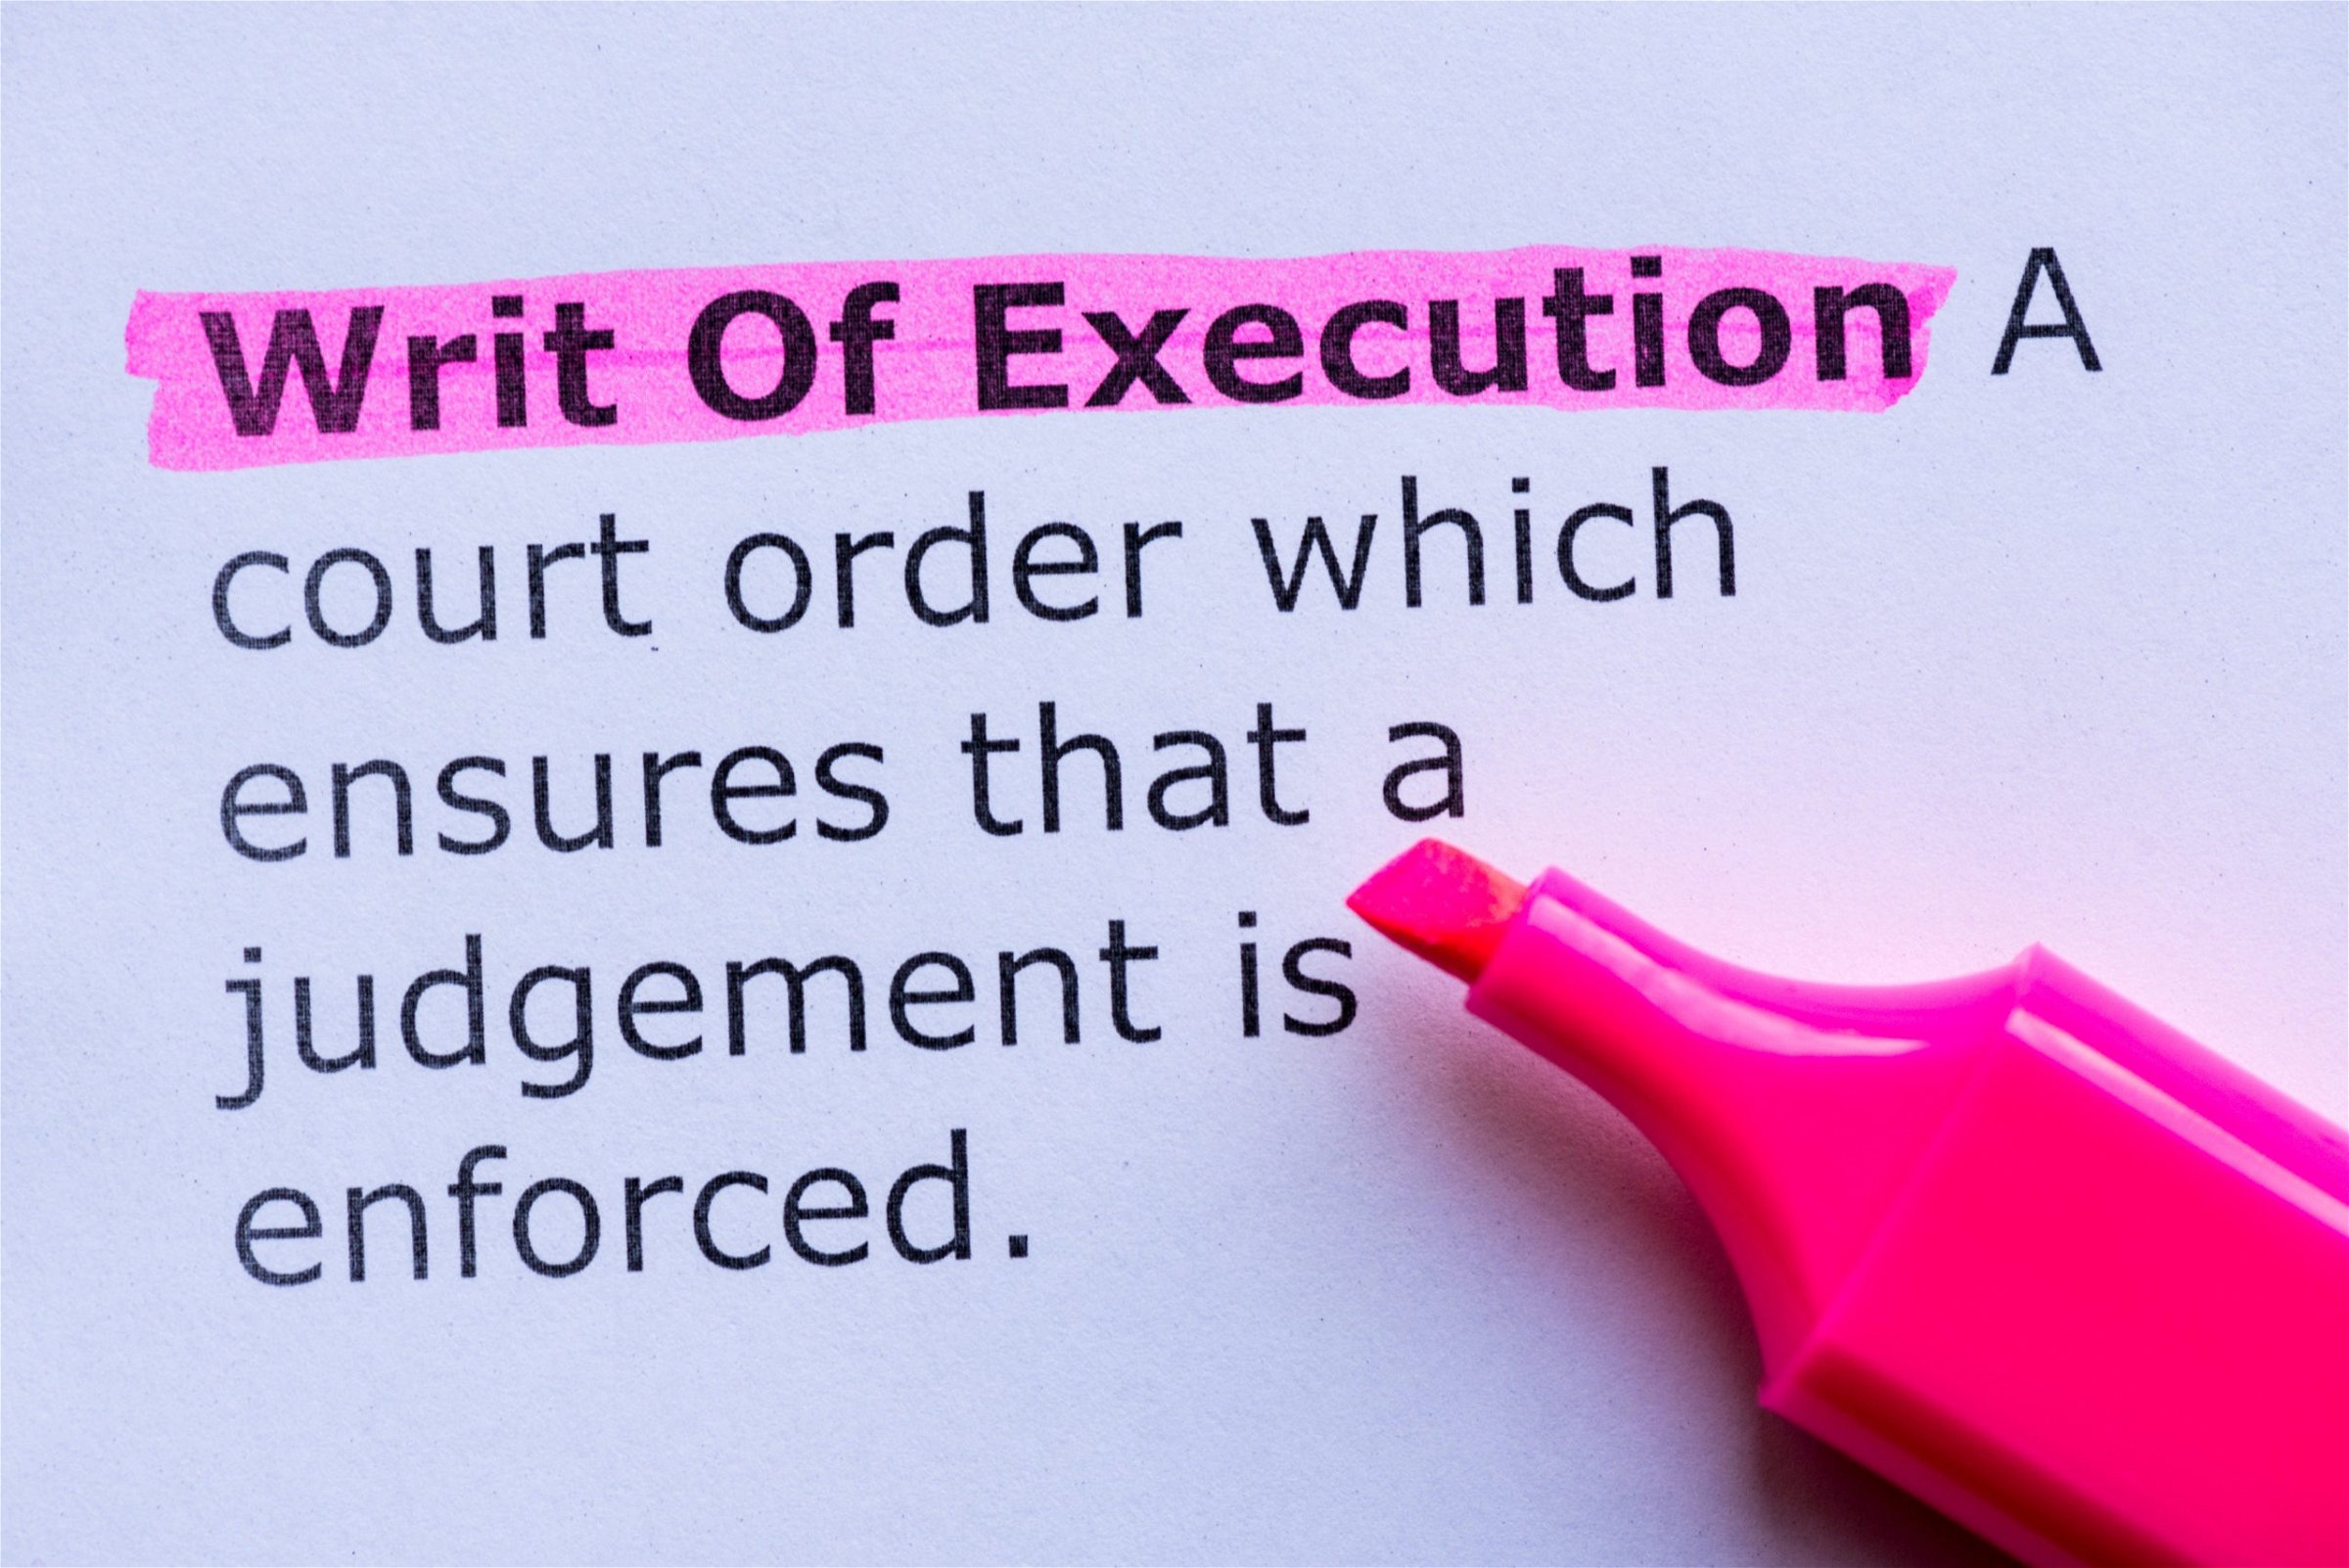 writ of execution, collections